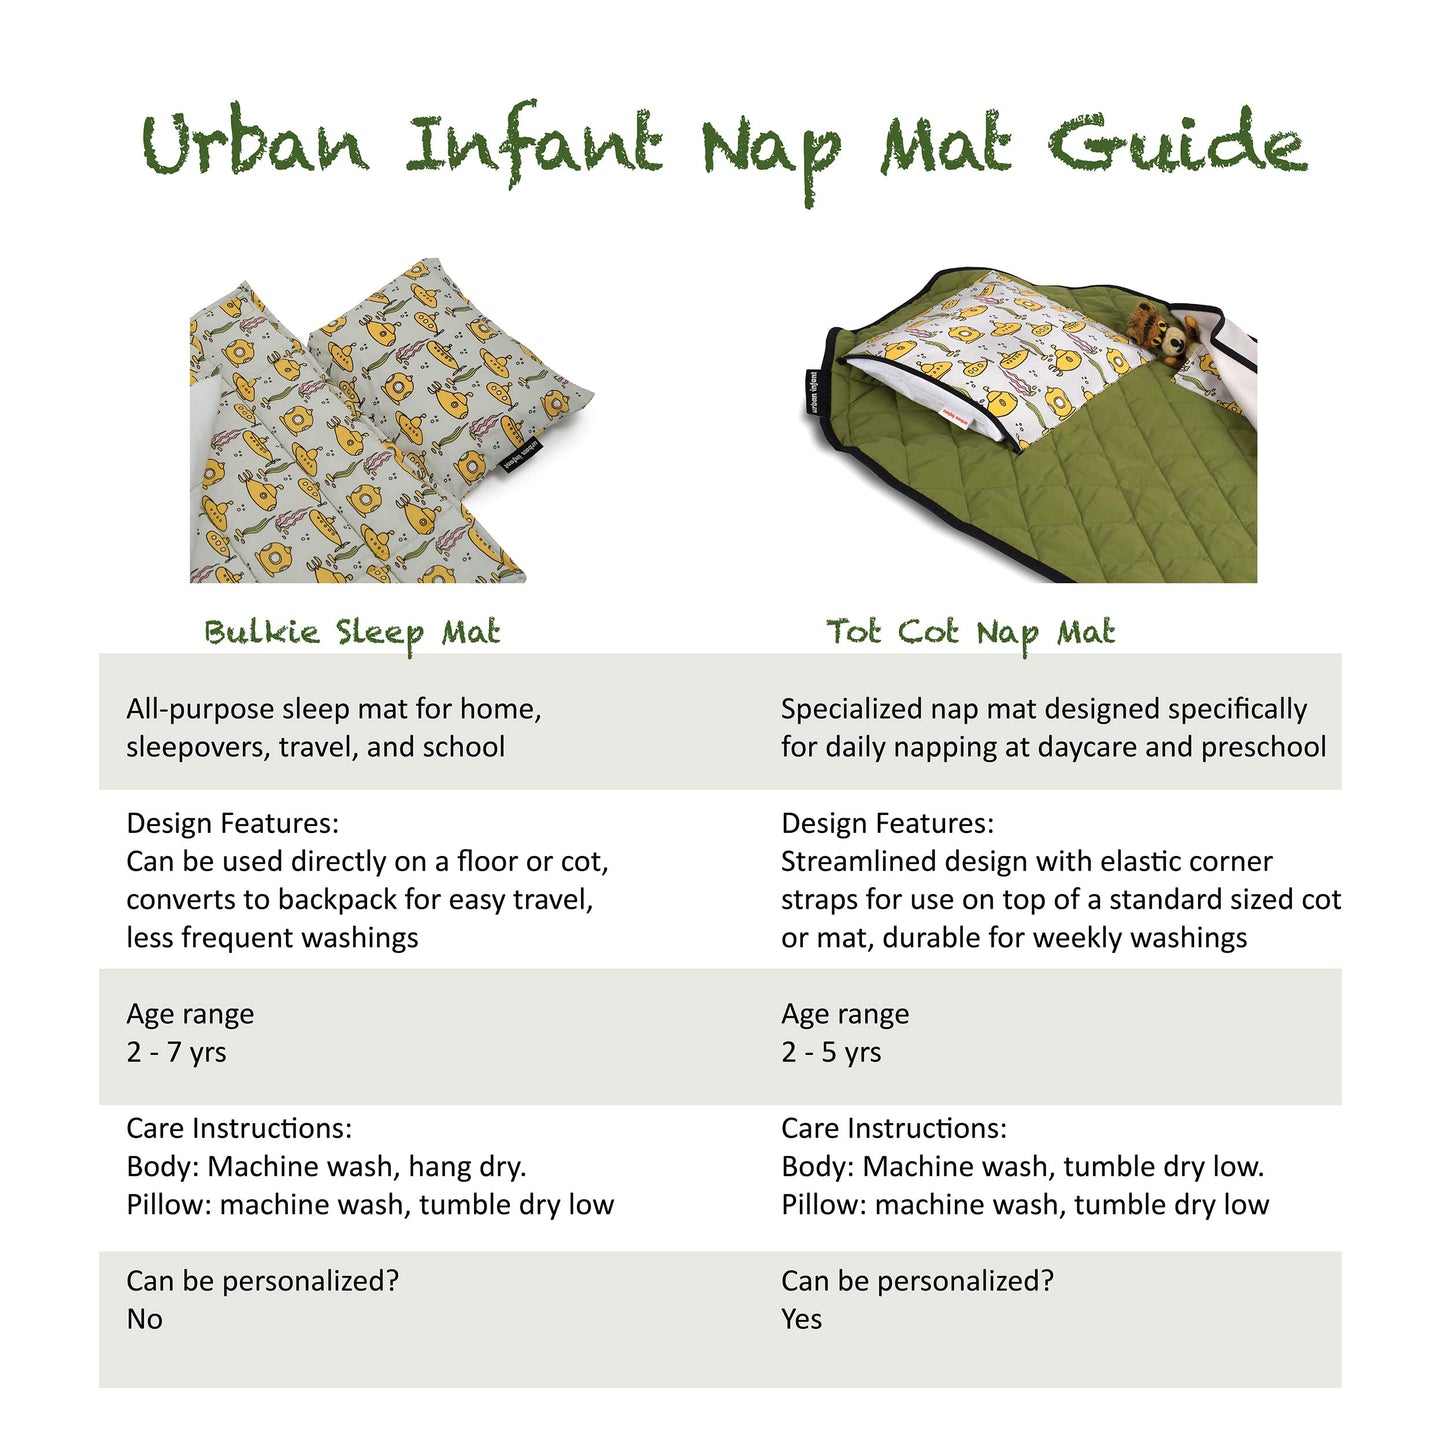 Urban Infant Tot Cot Kids Nap Mat - Toddler Preschool Daycare Bedding Cover with Blanket and Pillow - Pistachio